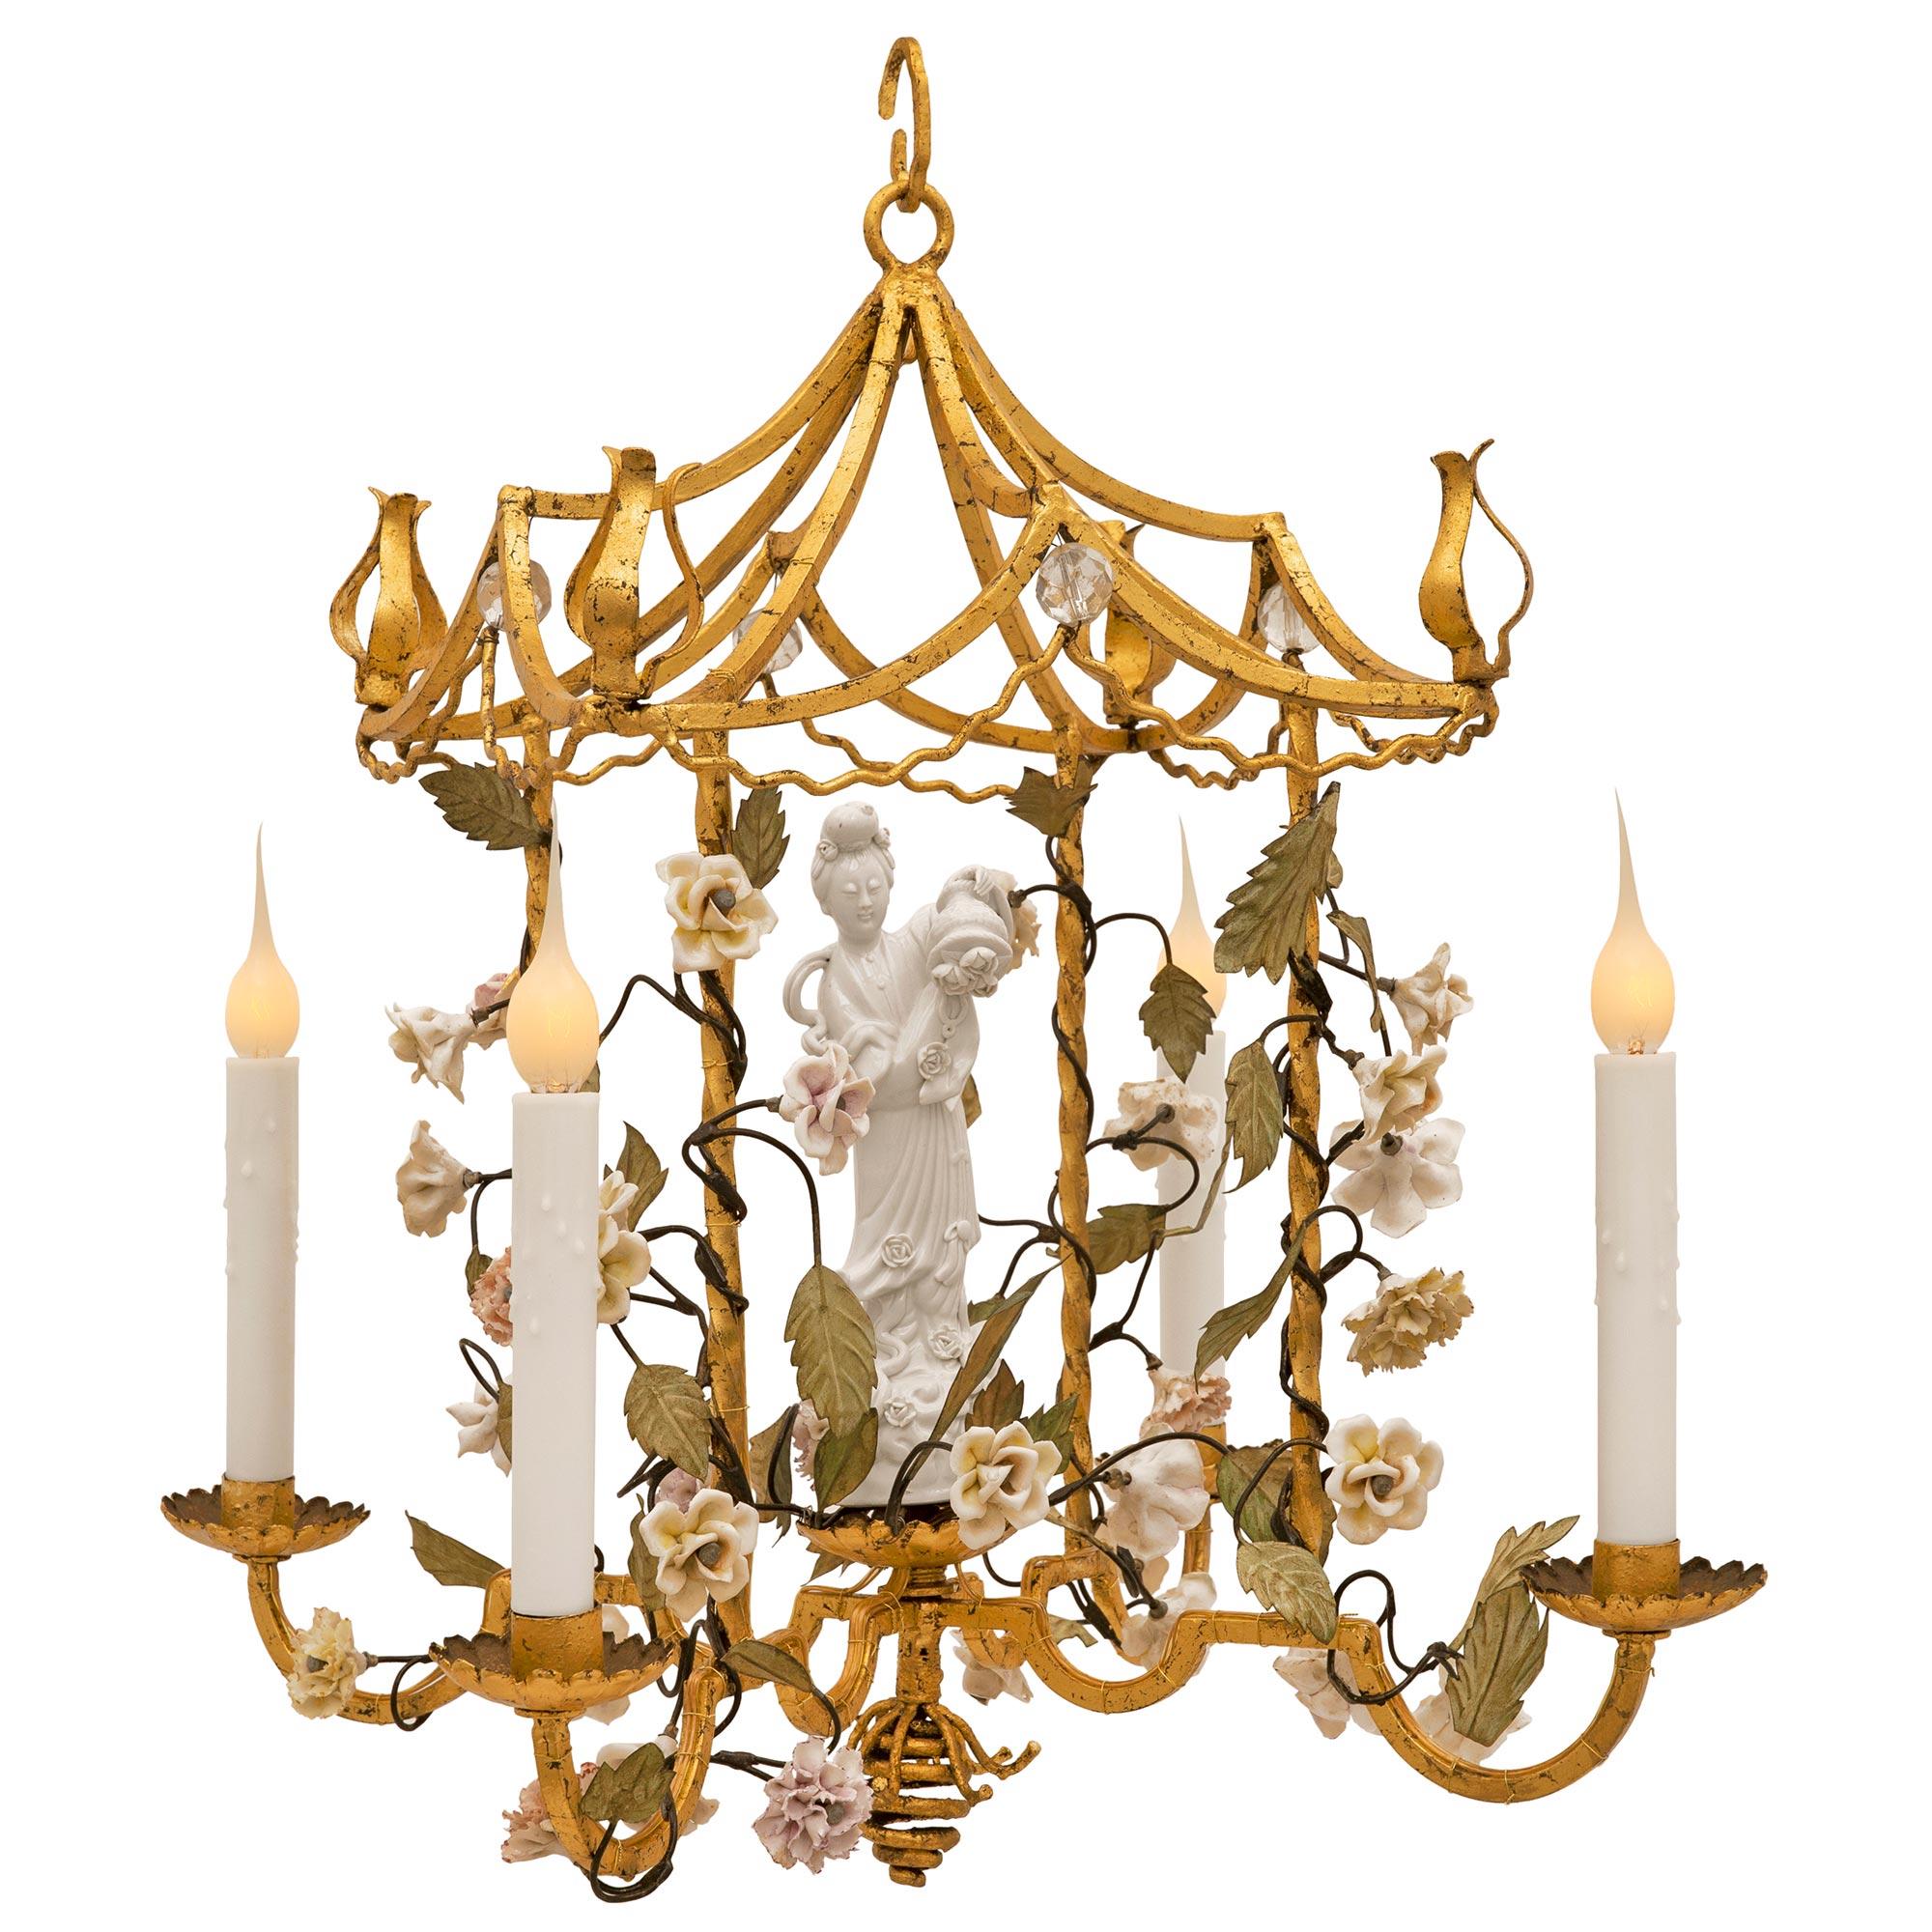 A unique and extremely decorative Italian turn of the century gilt metal, Blanc de Chine porcelain and tole chandelier. The four arm chandelier with Asian influence is centered by a beautiful spiraled bottom finial below the elegantly curved gilt